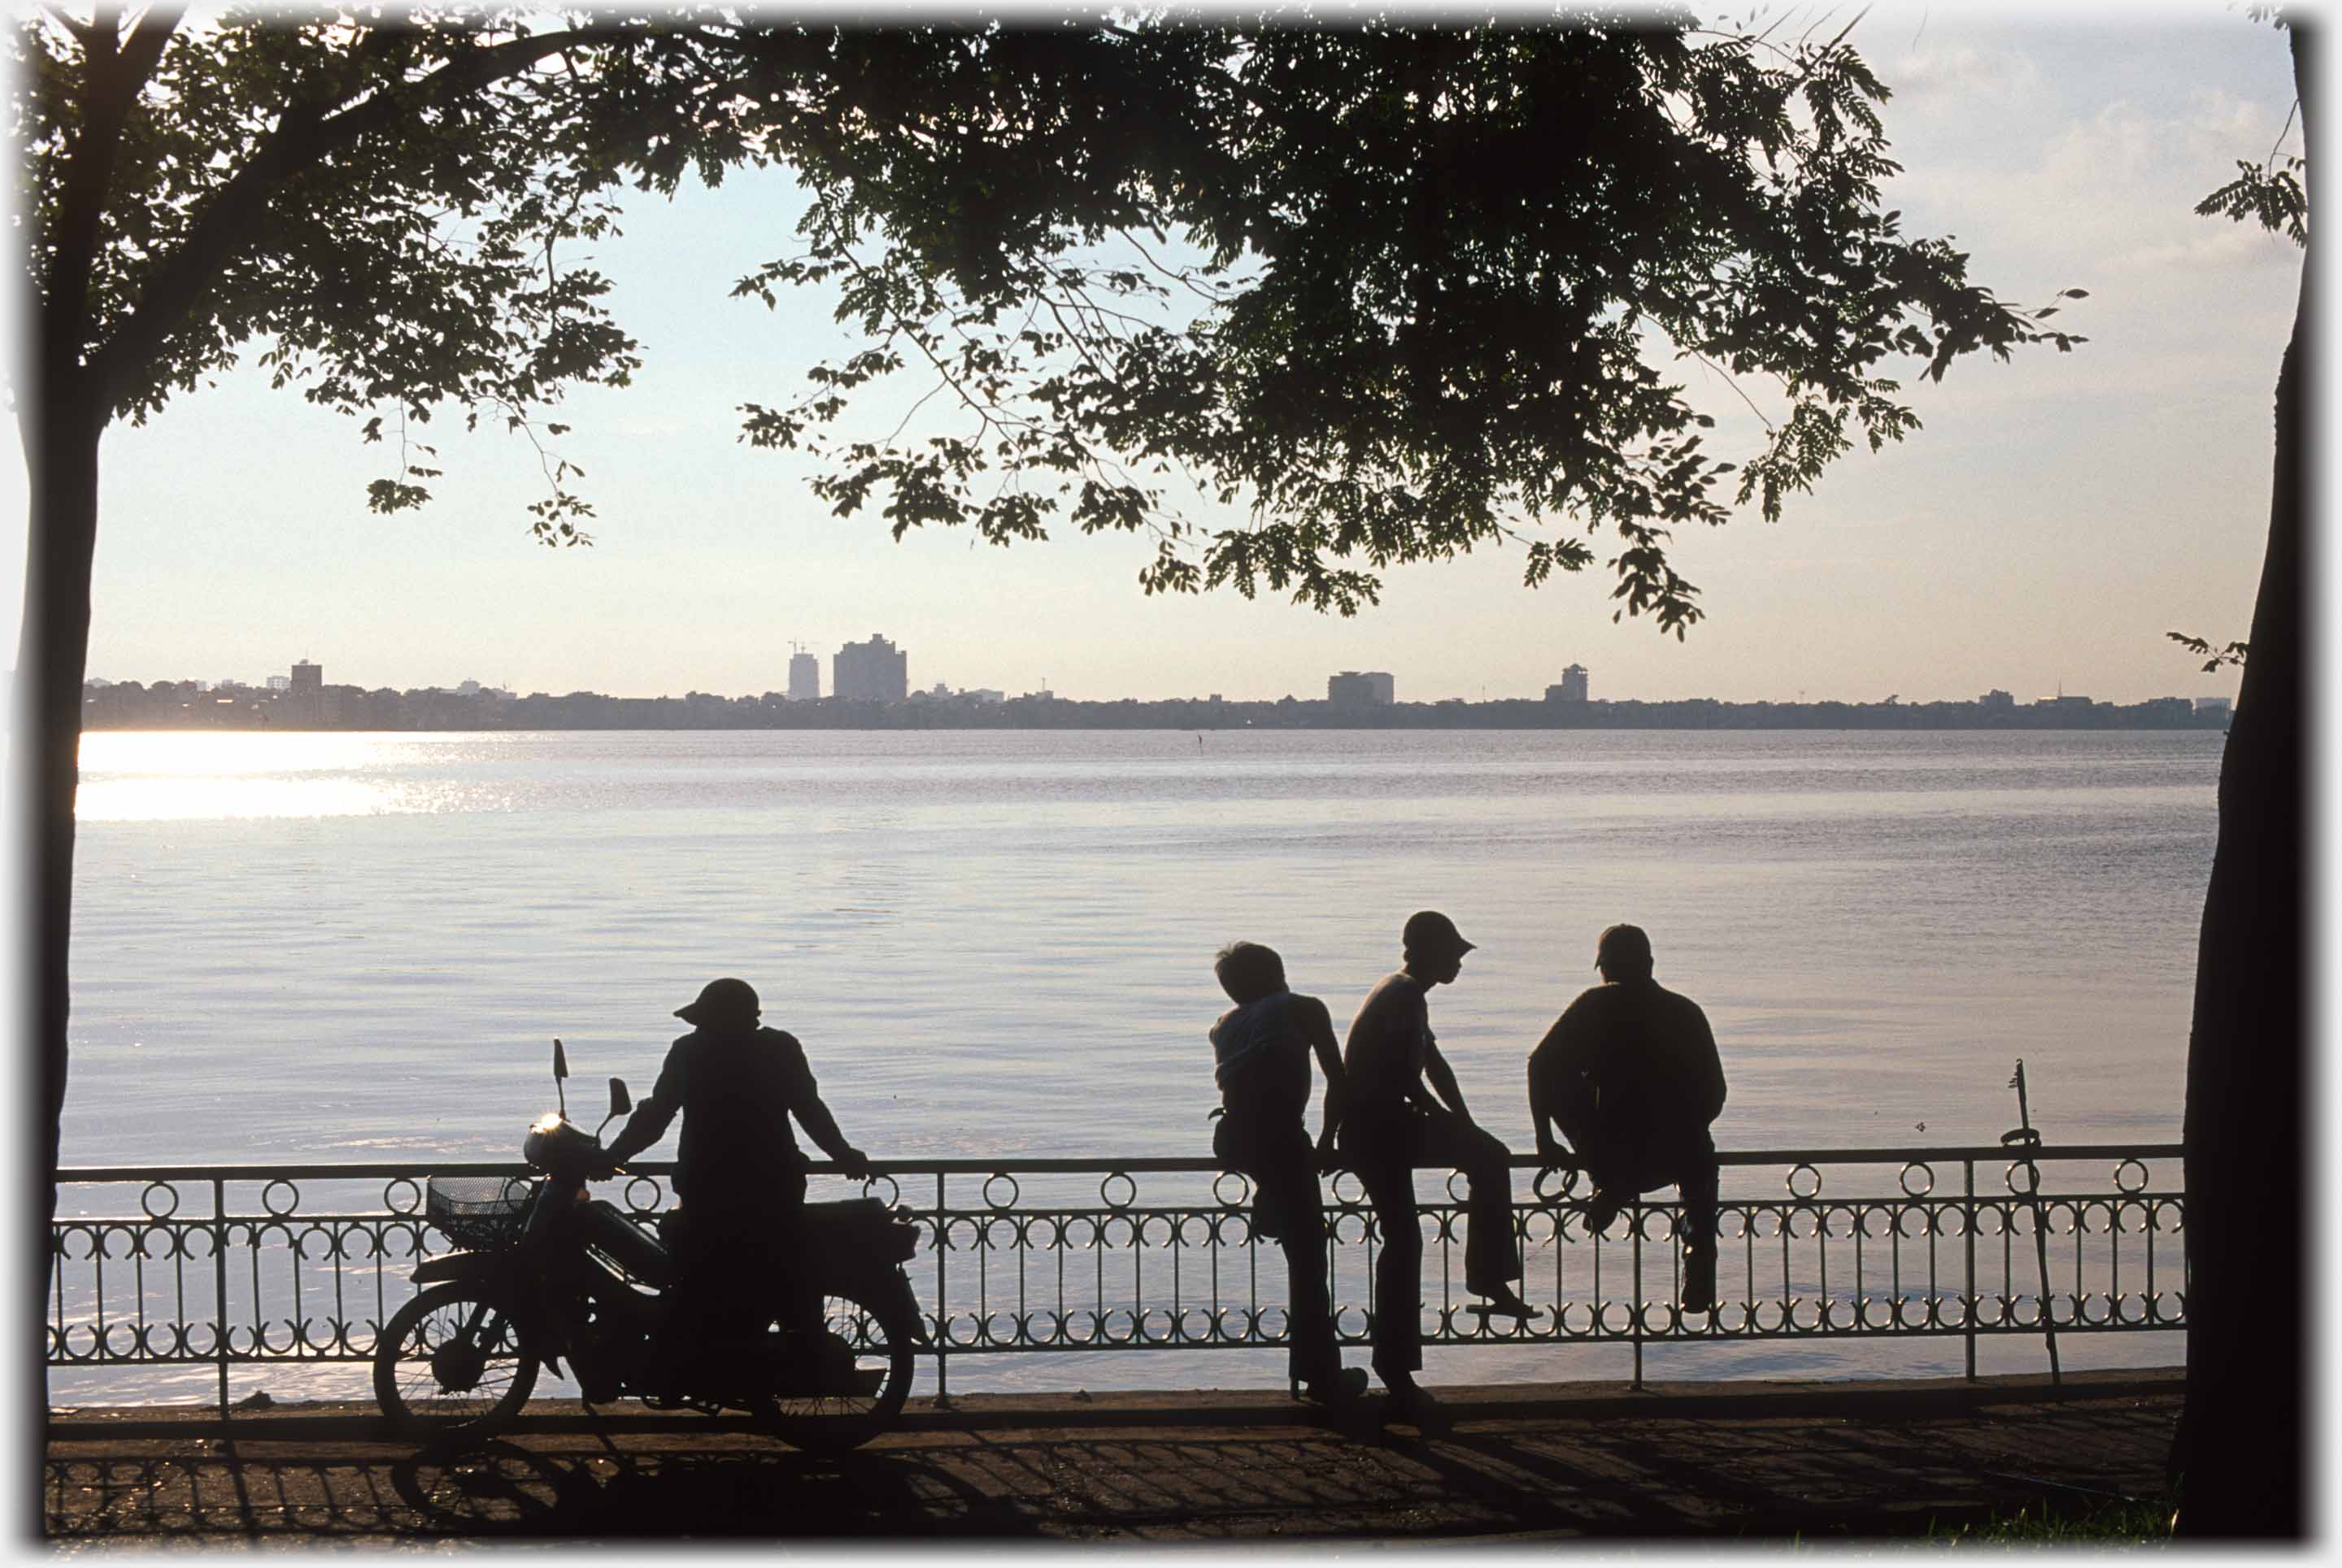 Silhouette of group sitting railings by lake.